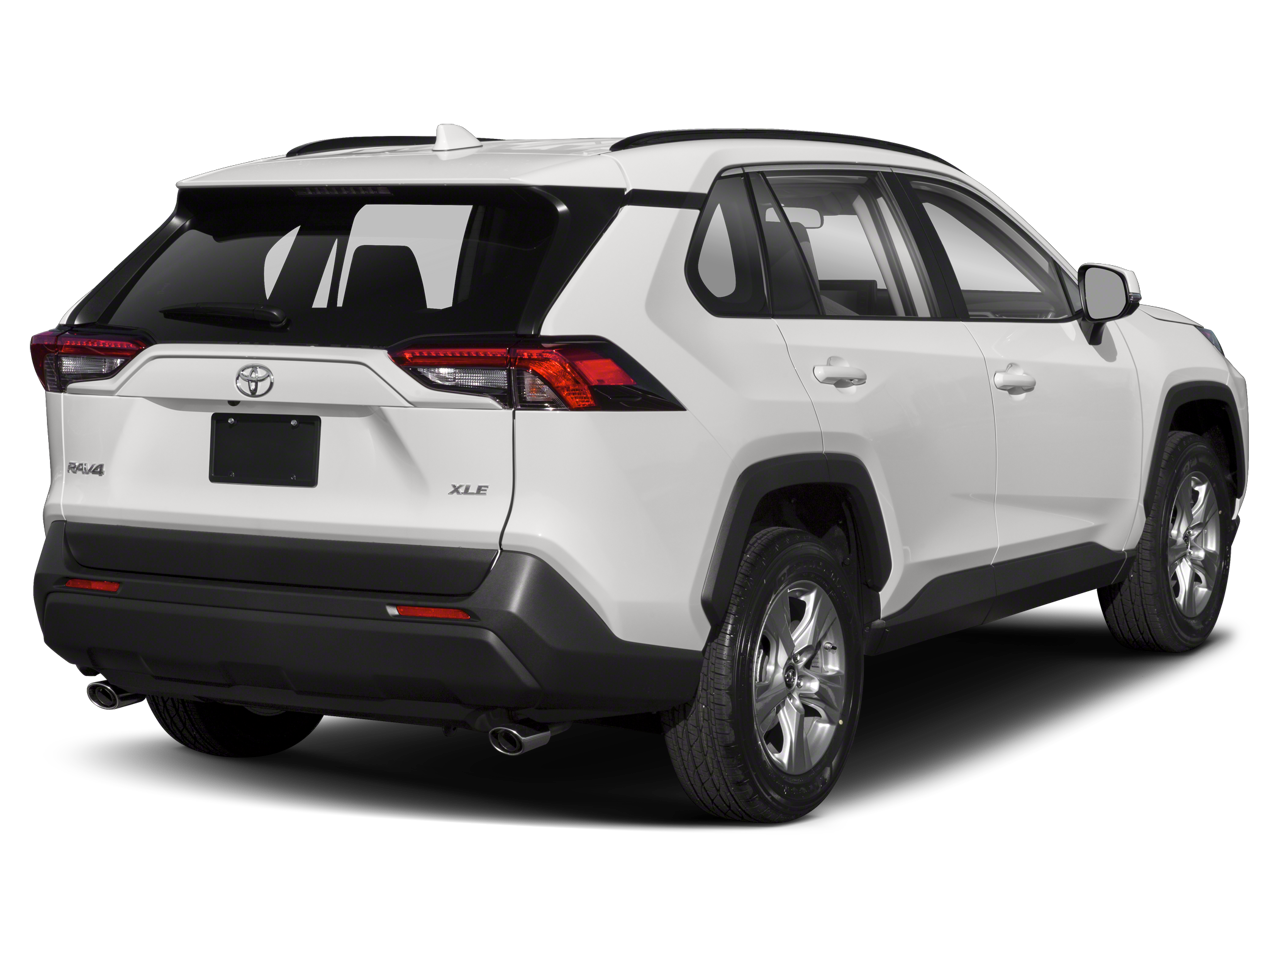 Used 2020 Toyota RAV4 XLE with VIN 2T3W1RFV6LC058050 for sale in Diberville, MS